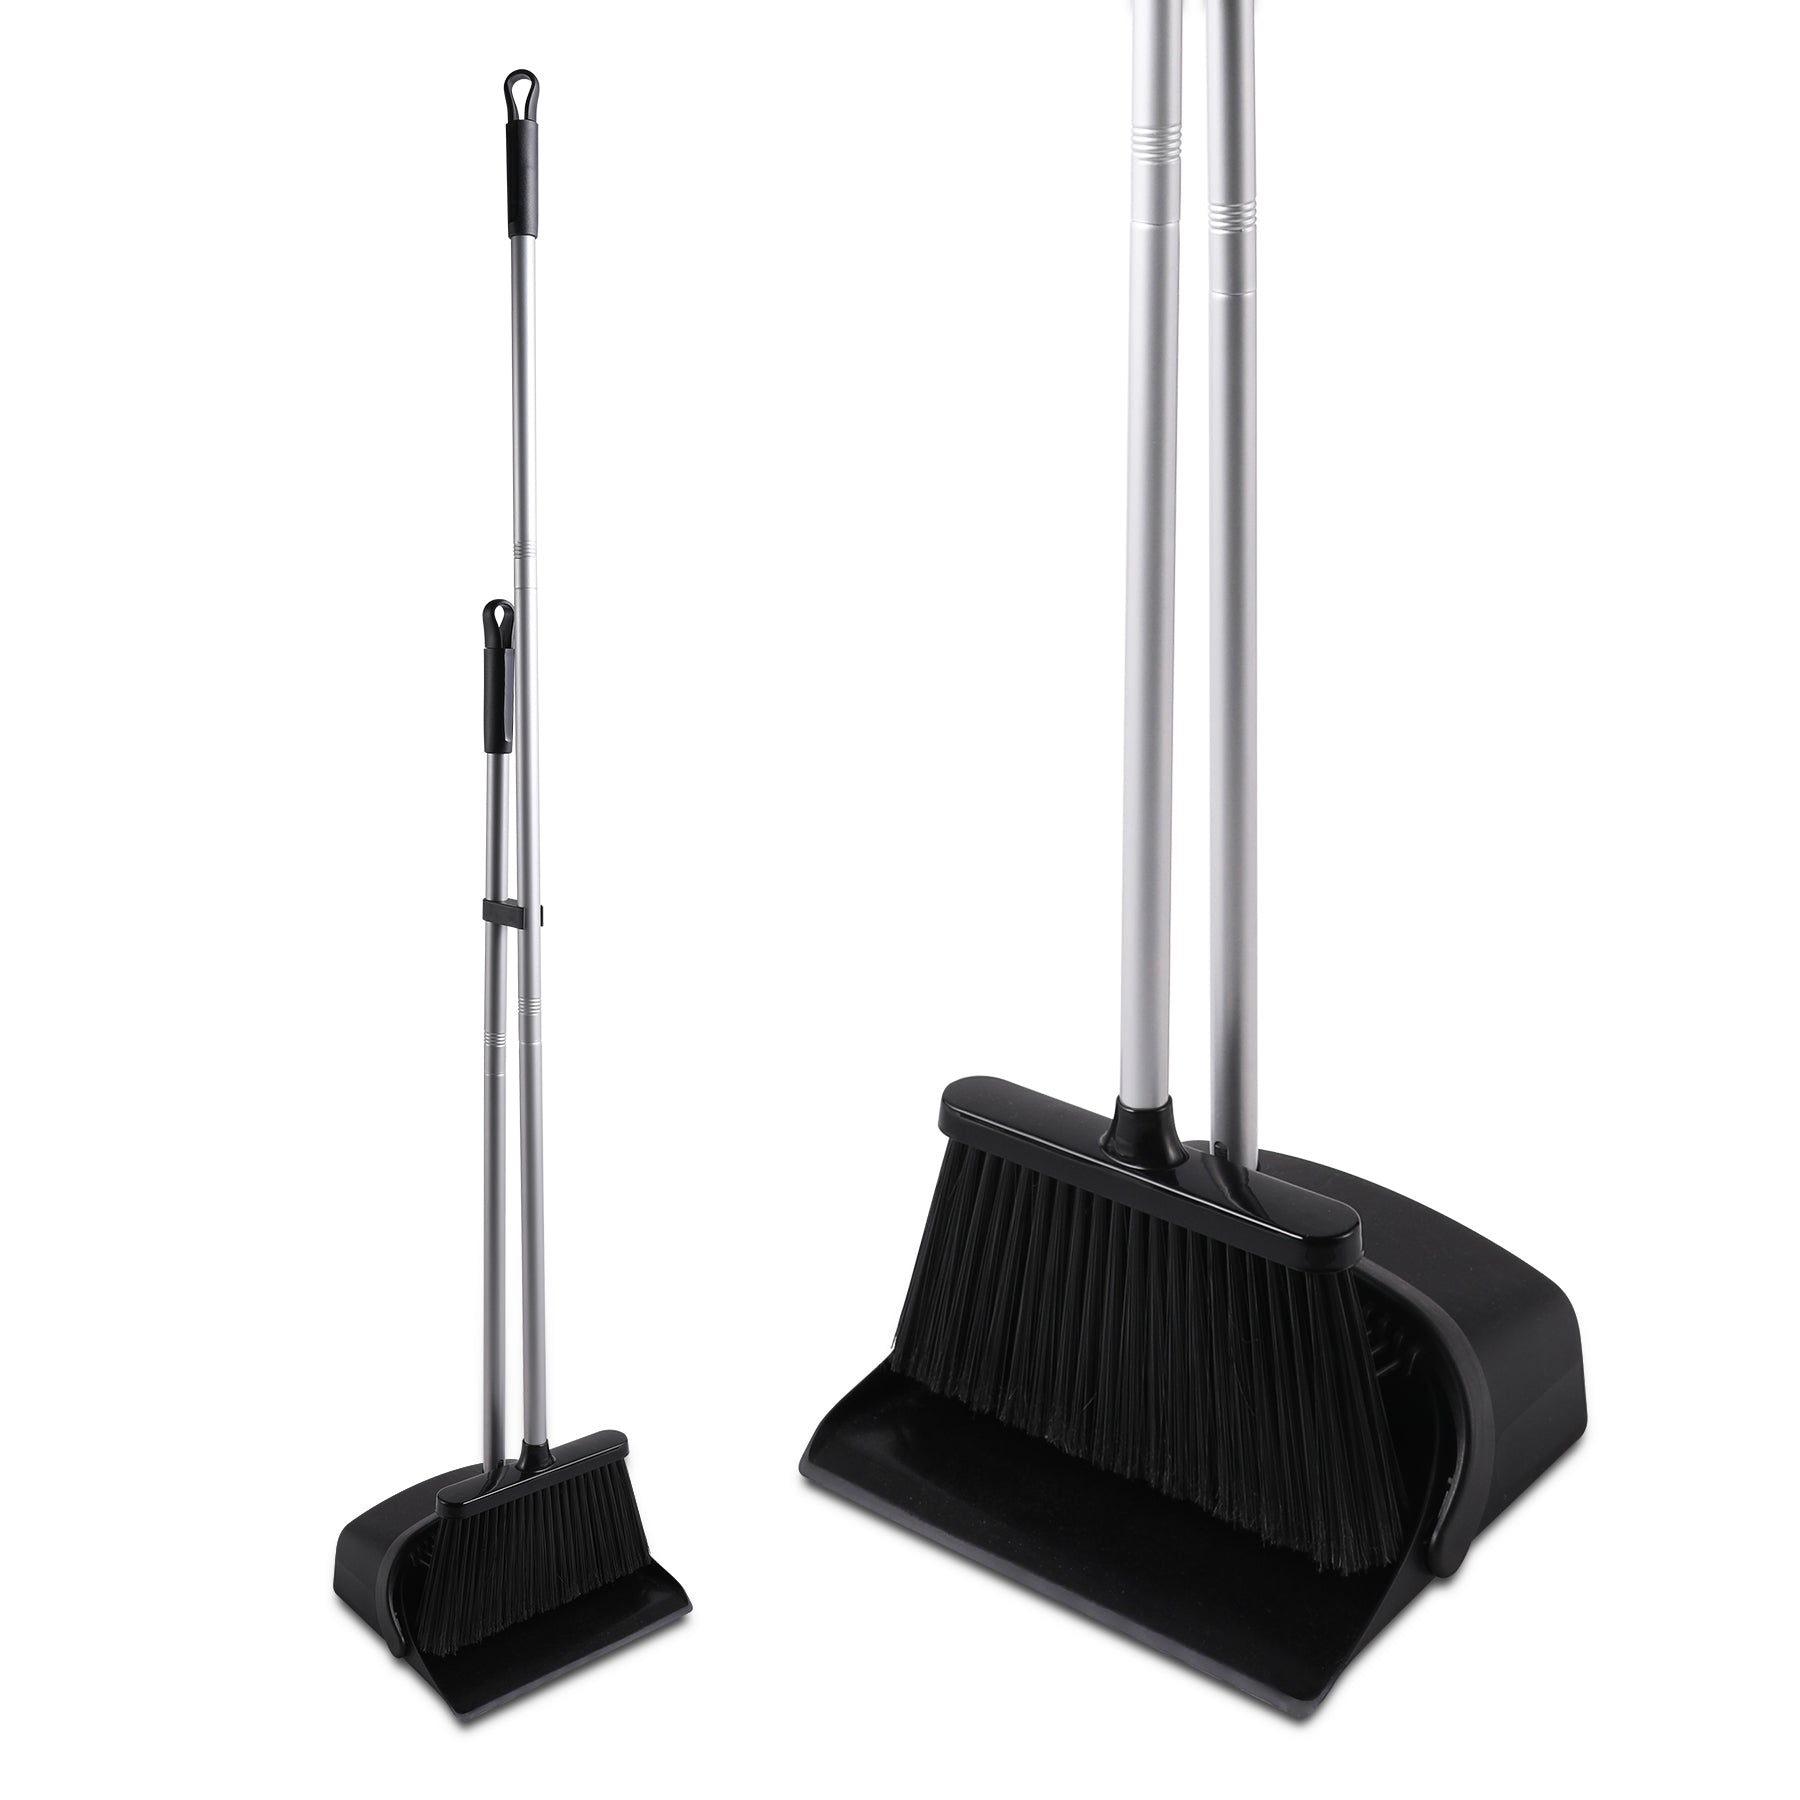 Home Kitchen Office Lobby Outdoors Upright Broom and Dustpan Set